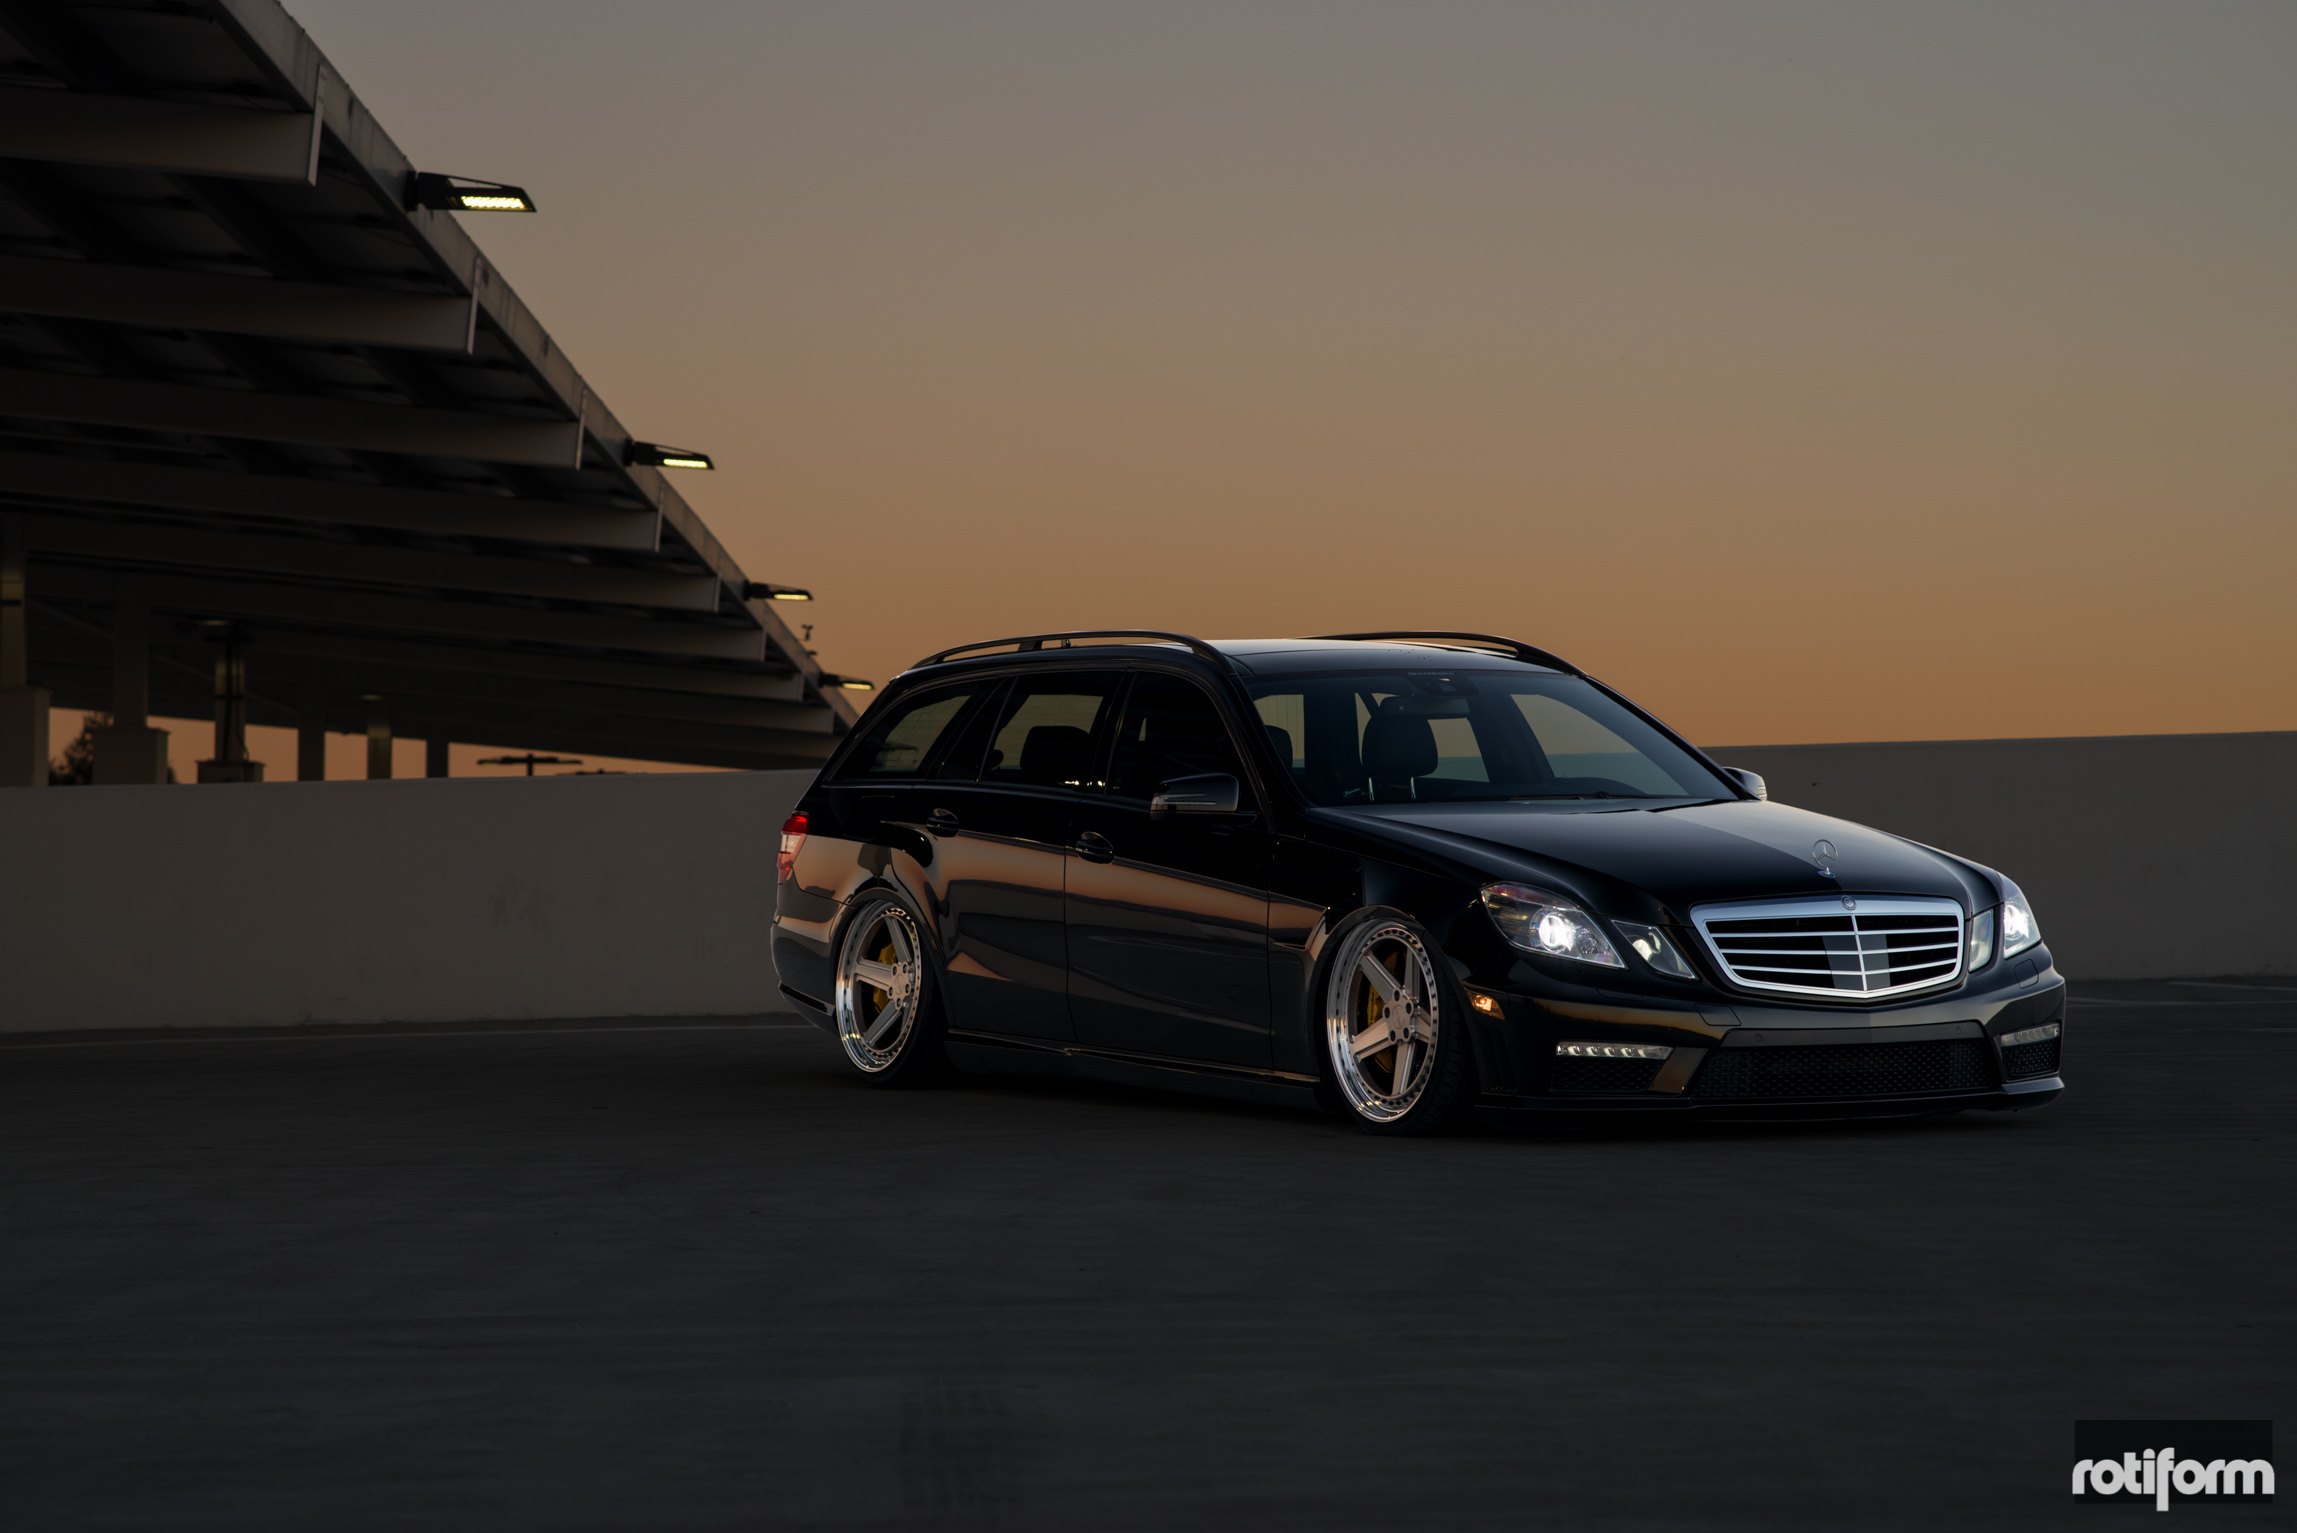 Black Slammed Mercedes E Class with Chrome Grille - Photo by Rotiform